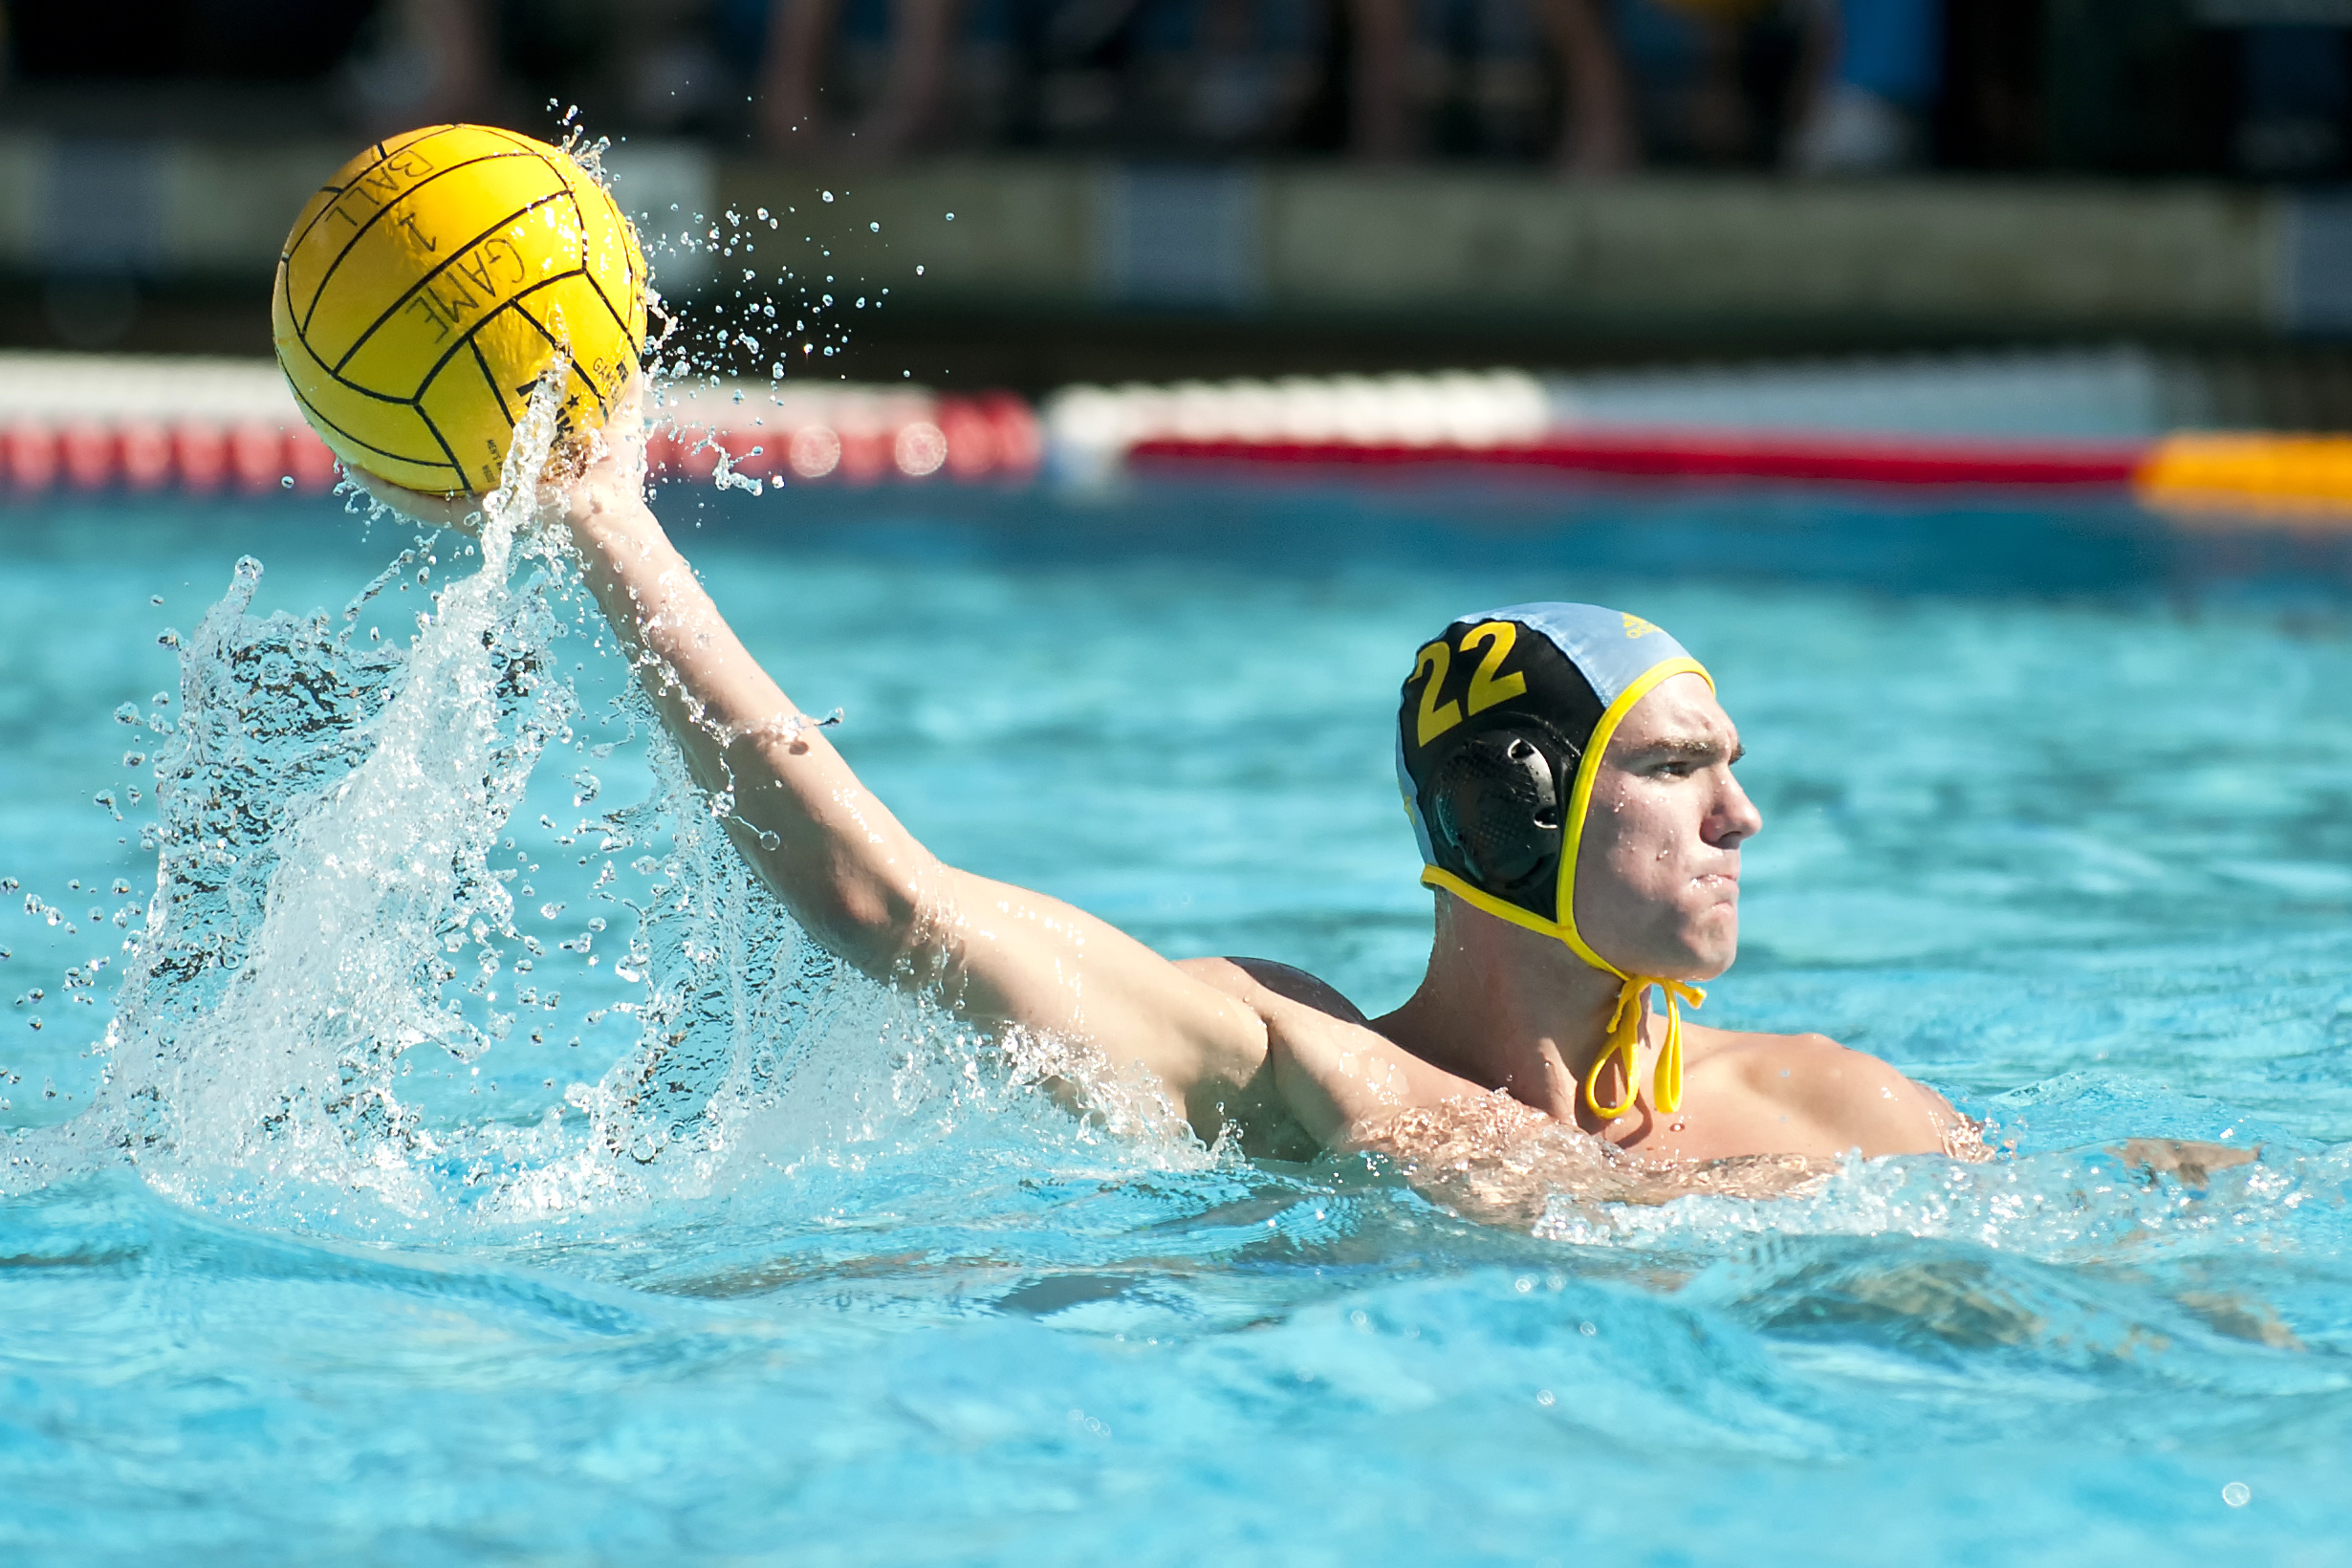 Water Polo: A professional poloist equipped with a special protective cap, A standard ball used in Men's competitions. 2460x1640 HD Wallpaper.